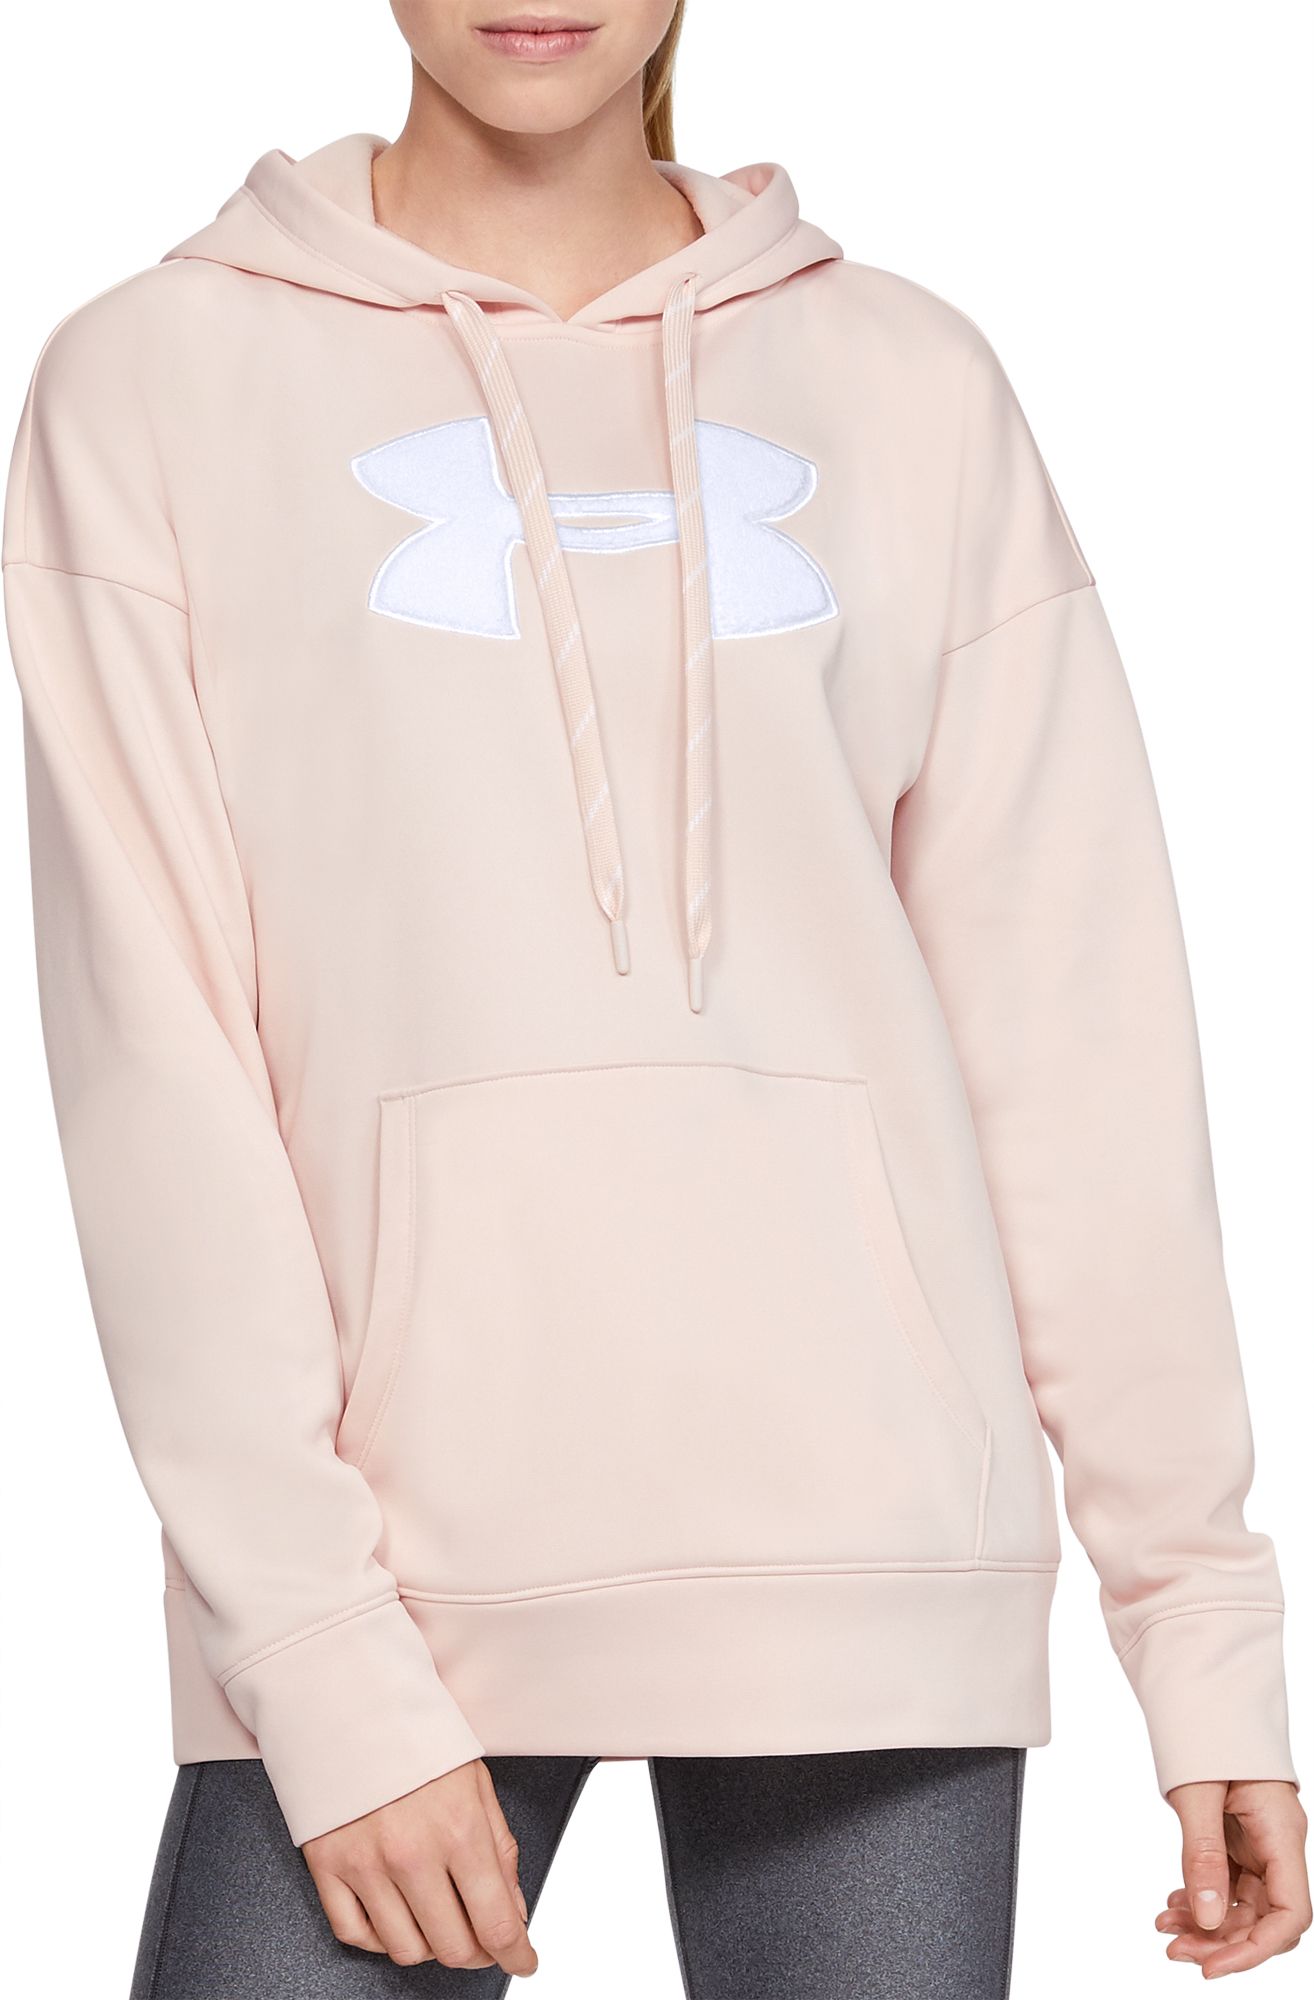 women's under armour hoodies clearance sale